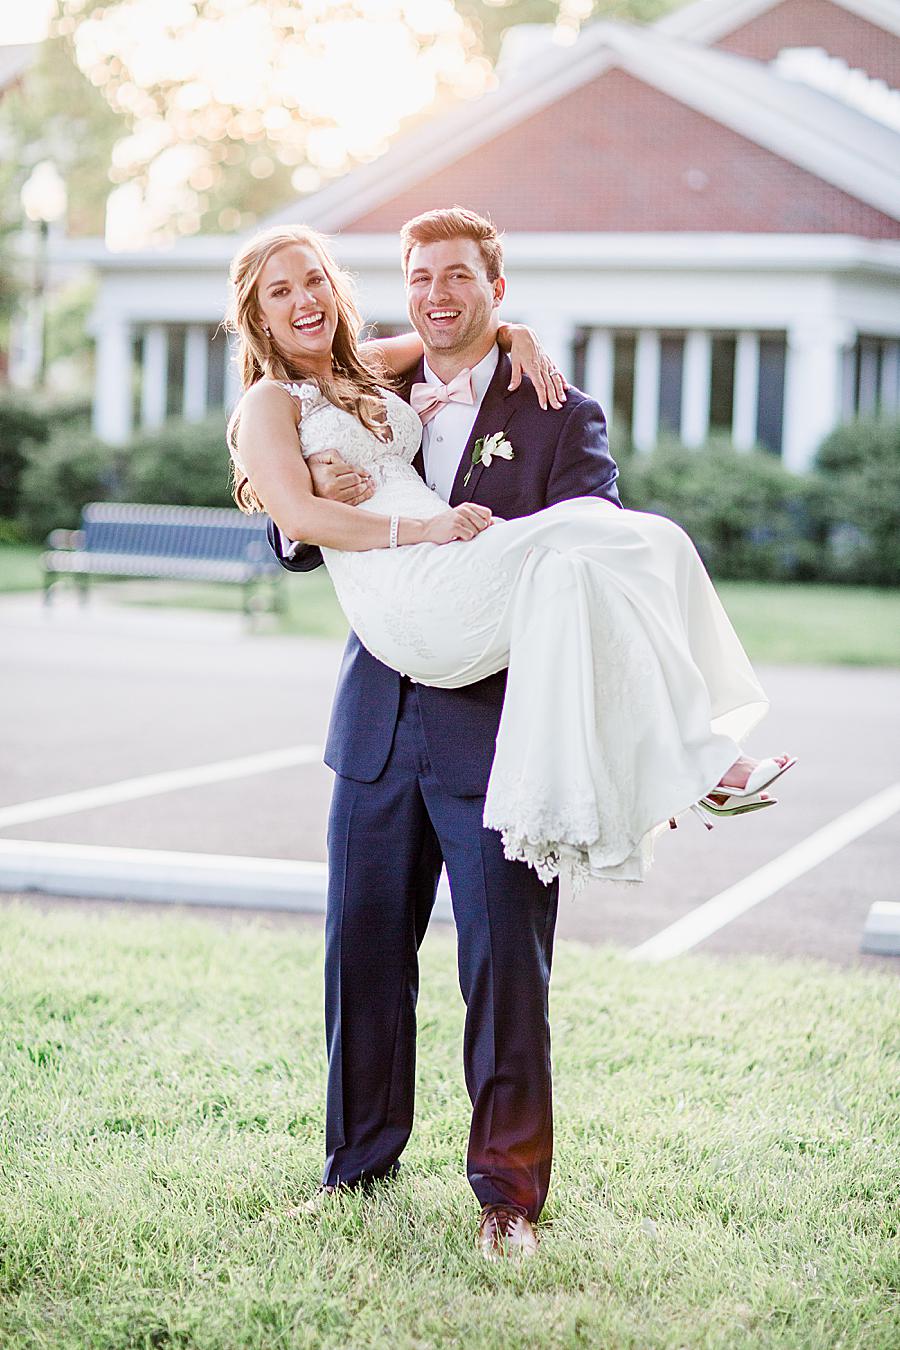 Princess carry at this The Olmsted Wedding by Knoxville Wedding Photographer, Amanda May Photos.